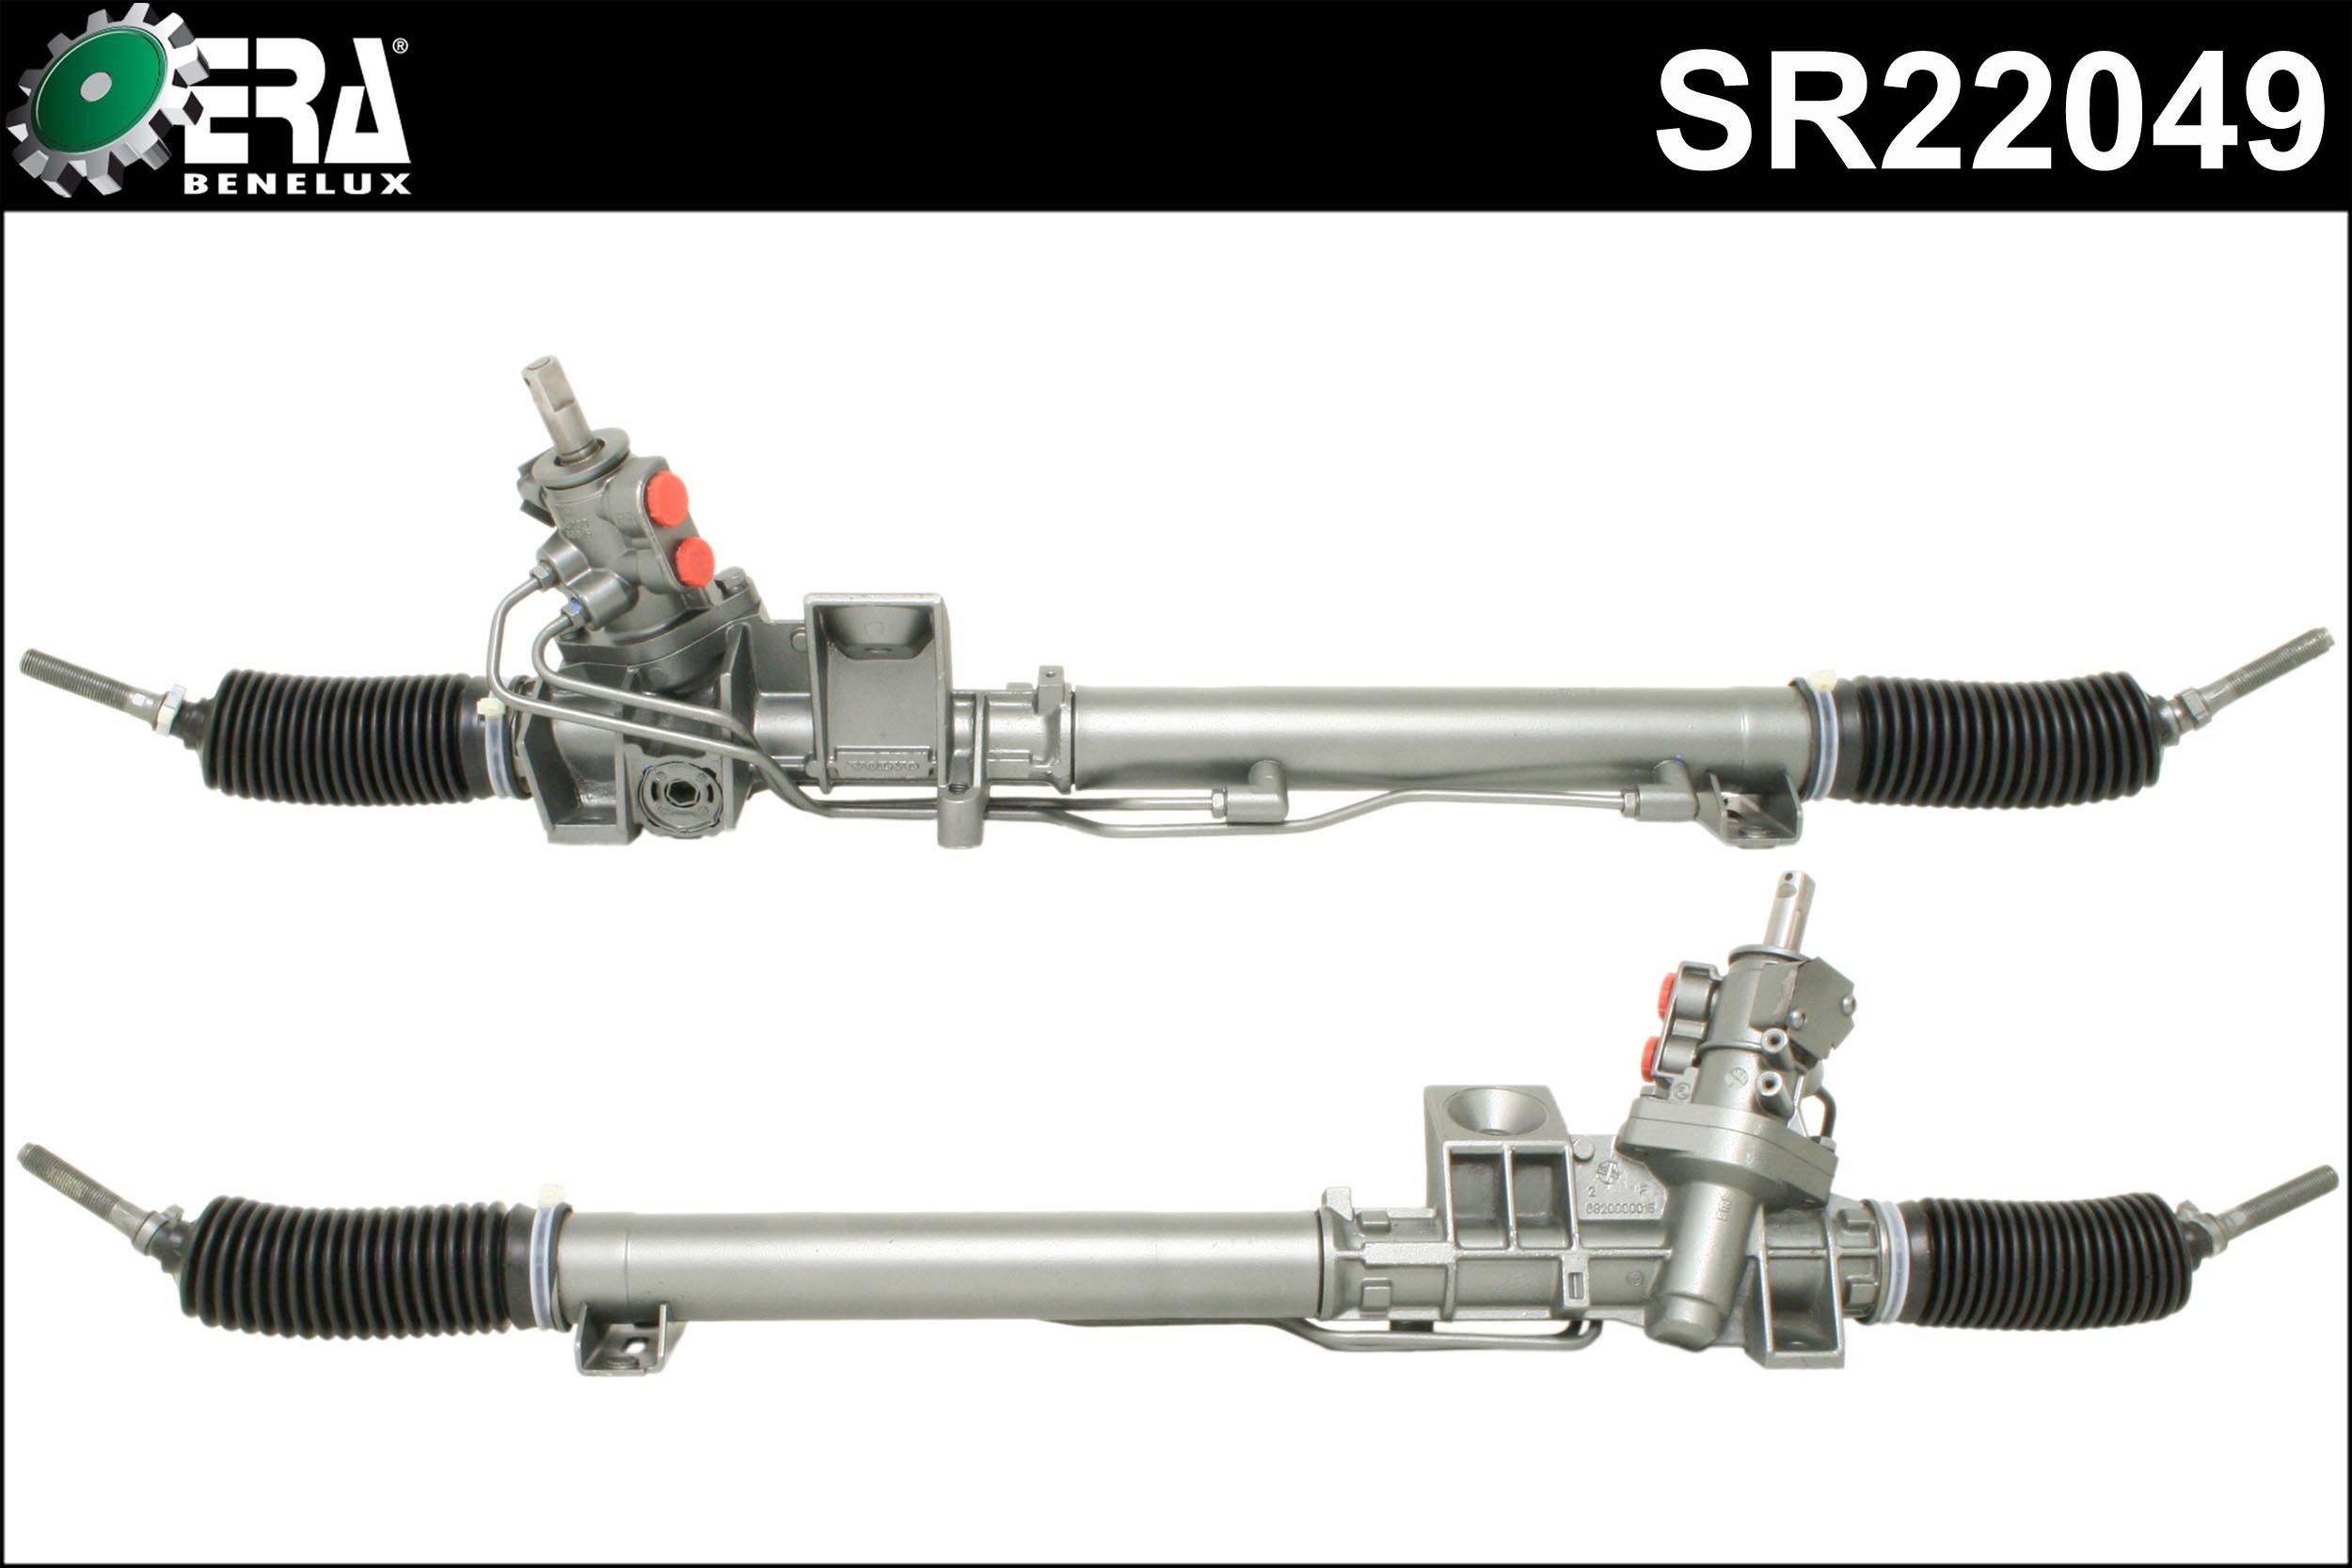 ERA Benelux Hydraulic, for vehicles with servotronic steering, for left-hand drive vehicles, with bore for sensor, SMI Steering gear SR22049 buy